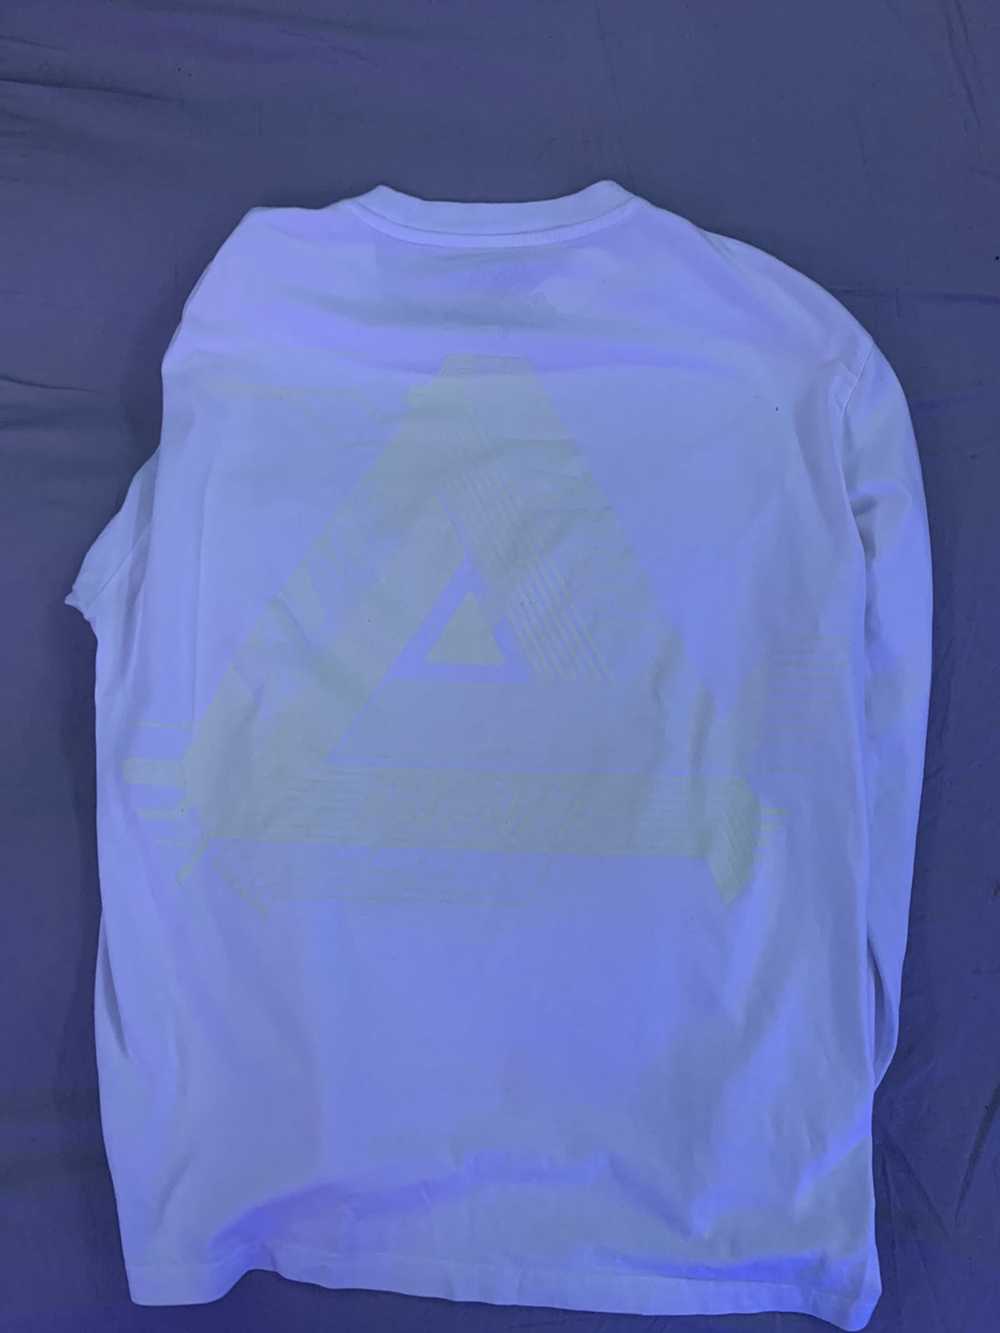 Palace Palace Tri Ferg Glow in the Dark - image 4